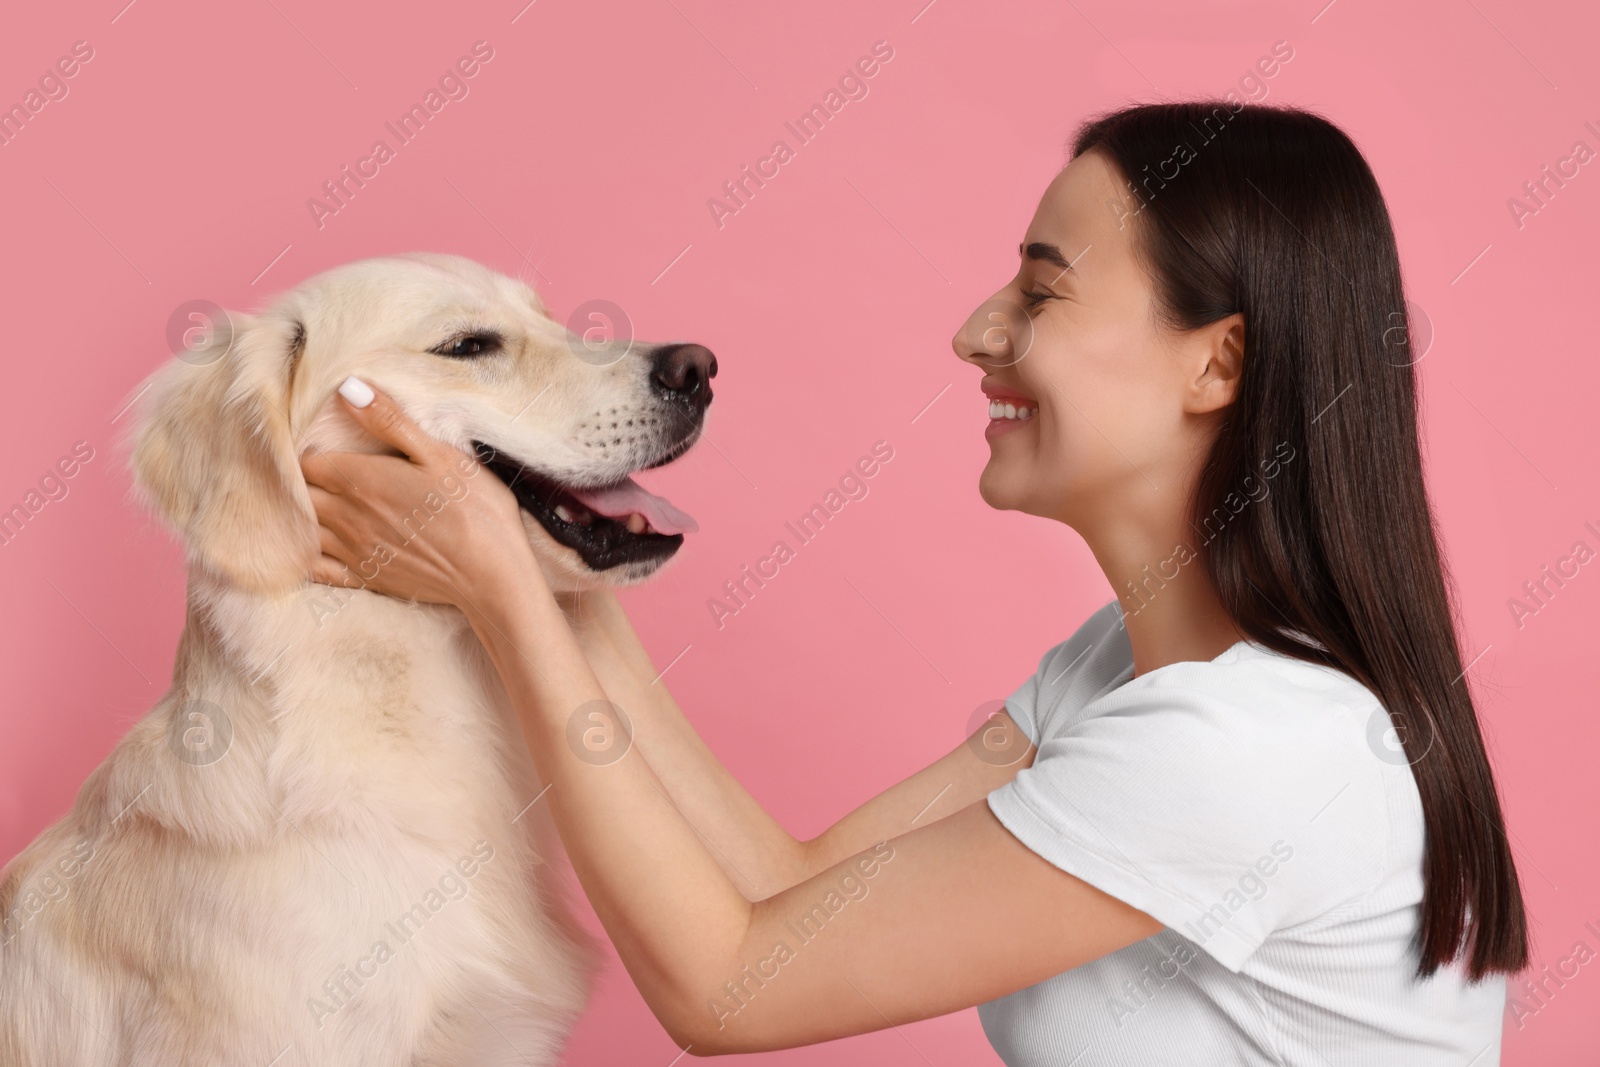 Photo of Happy woman playing with cute Labrador Retriever dog on pink background. Adorable pet